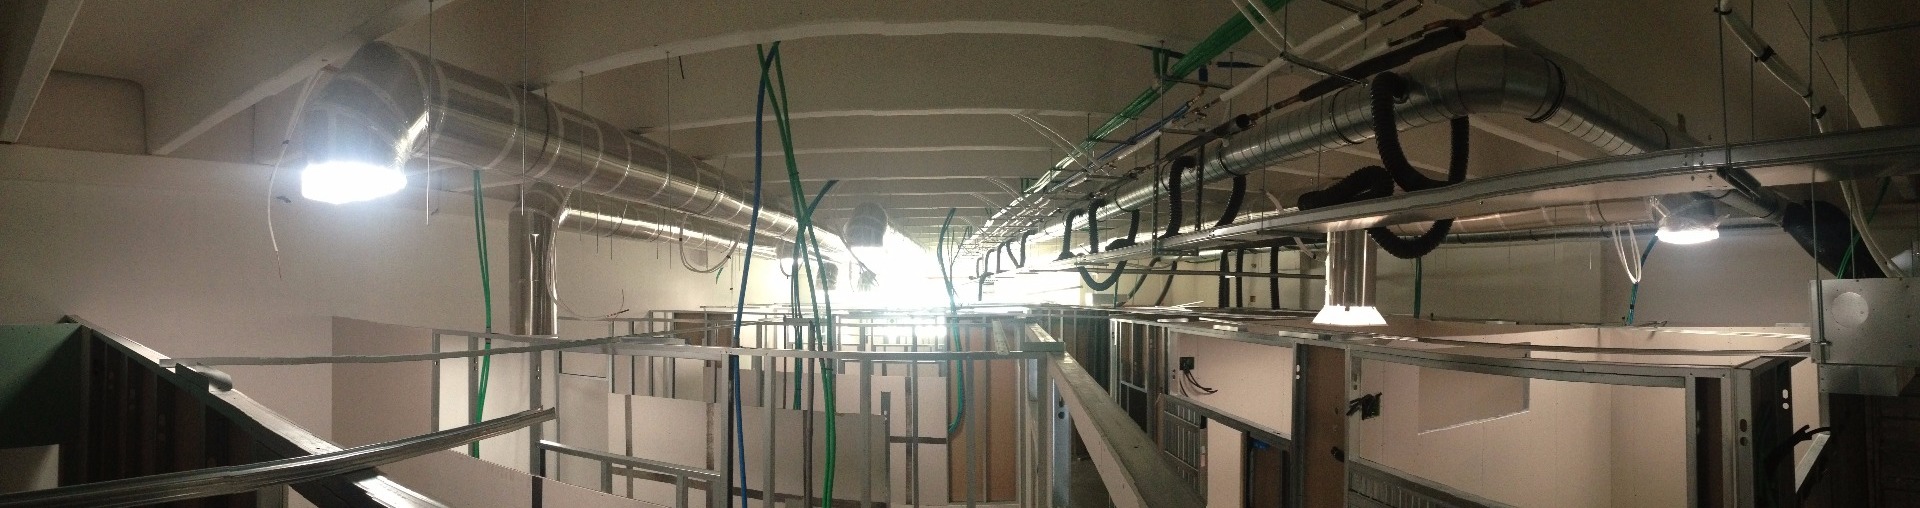 Above-ceiling shot showing installed daylighting system tubing